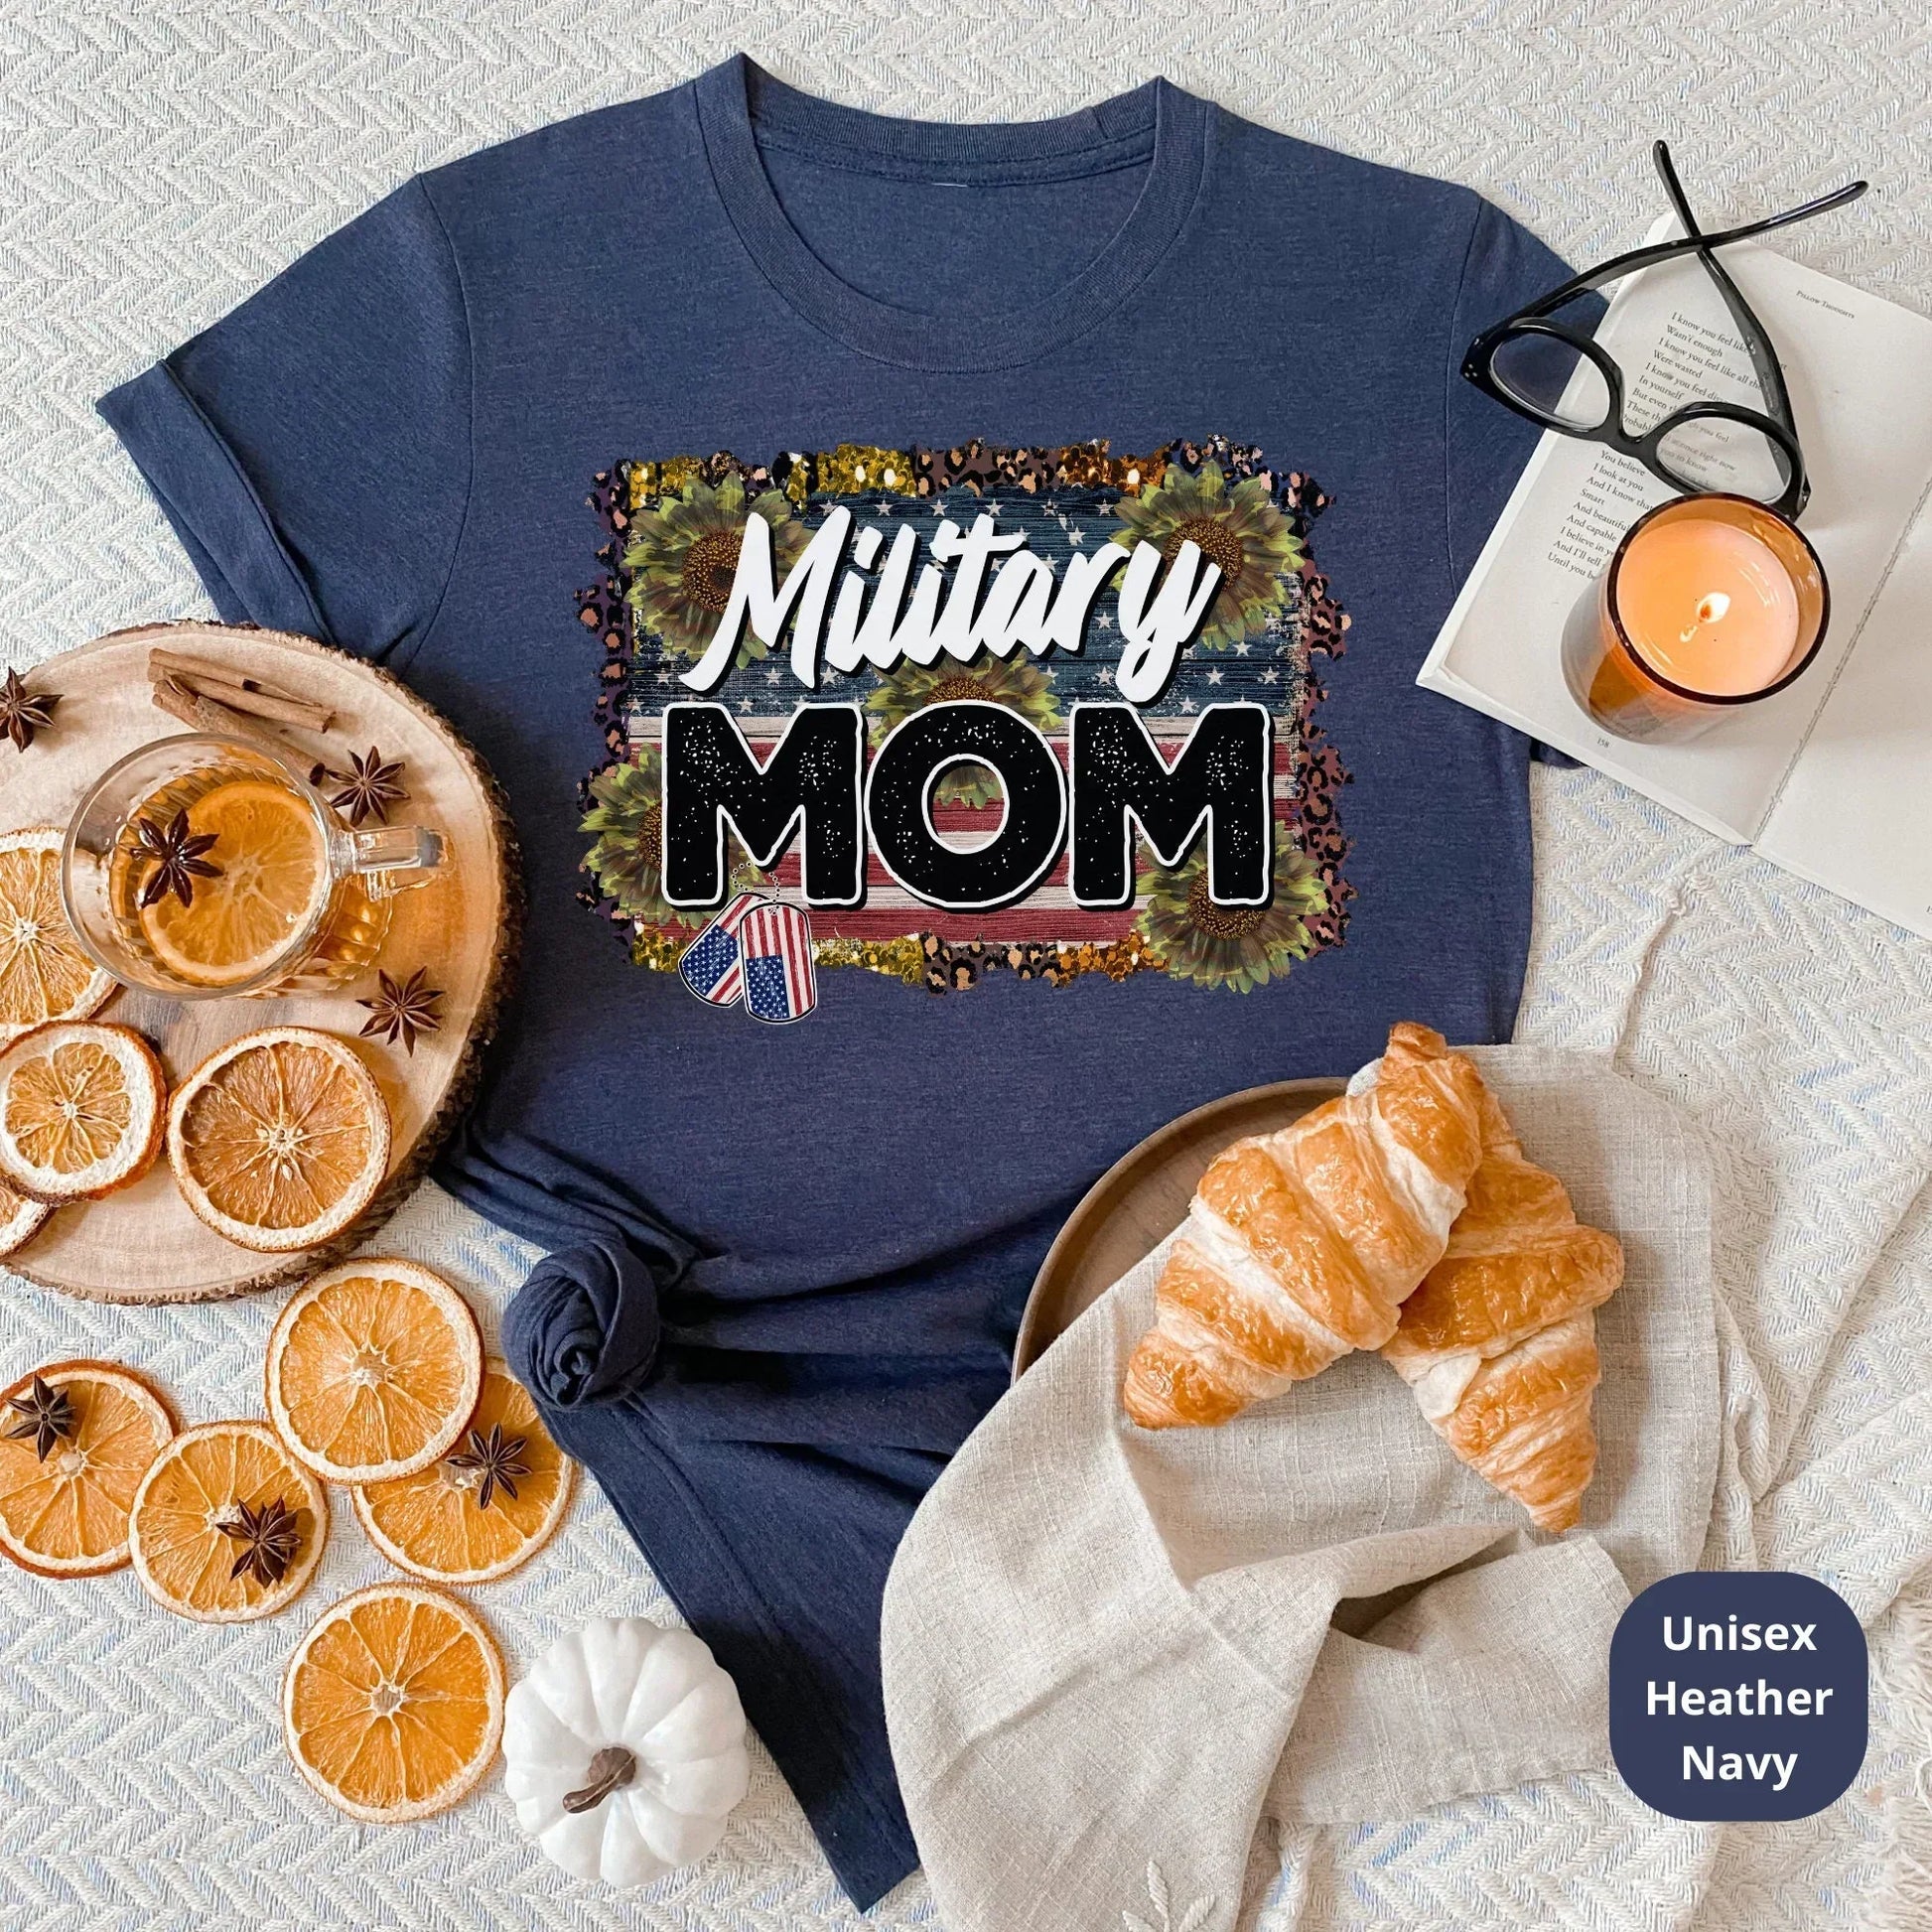 Military Mom Shirt, Proud Army Mom, Military Wife Sweatshirt, Army Mom Gift, Air Force Mom, Support our troops, Marine Coast guard, Navy Mom